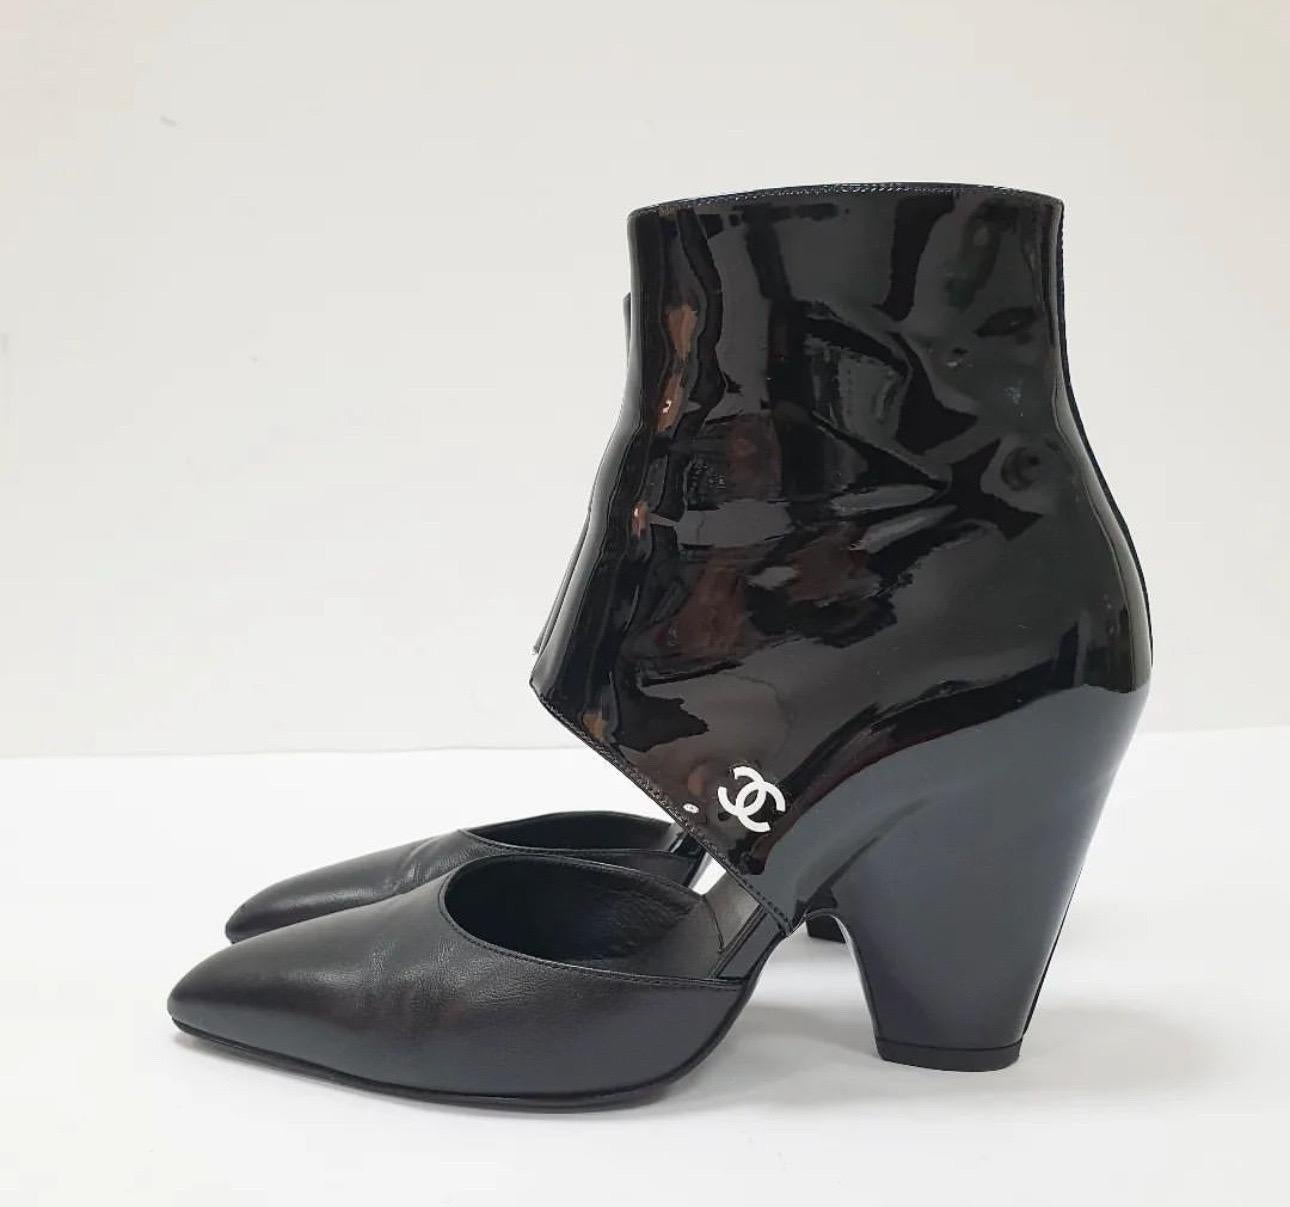 Chanel Patent Leather Ankle Boots
From the 2020 Collection by Virginie Viard
Black 
Interlocking CC Logo
Pointed-Toes
Cone Heels
Exposed Zip Closure at Sides
Sz 37
Very good condition. No box. No dust bag.